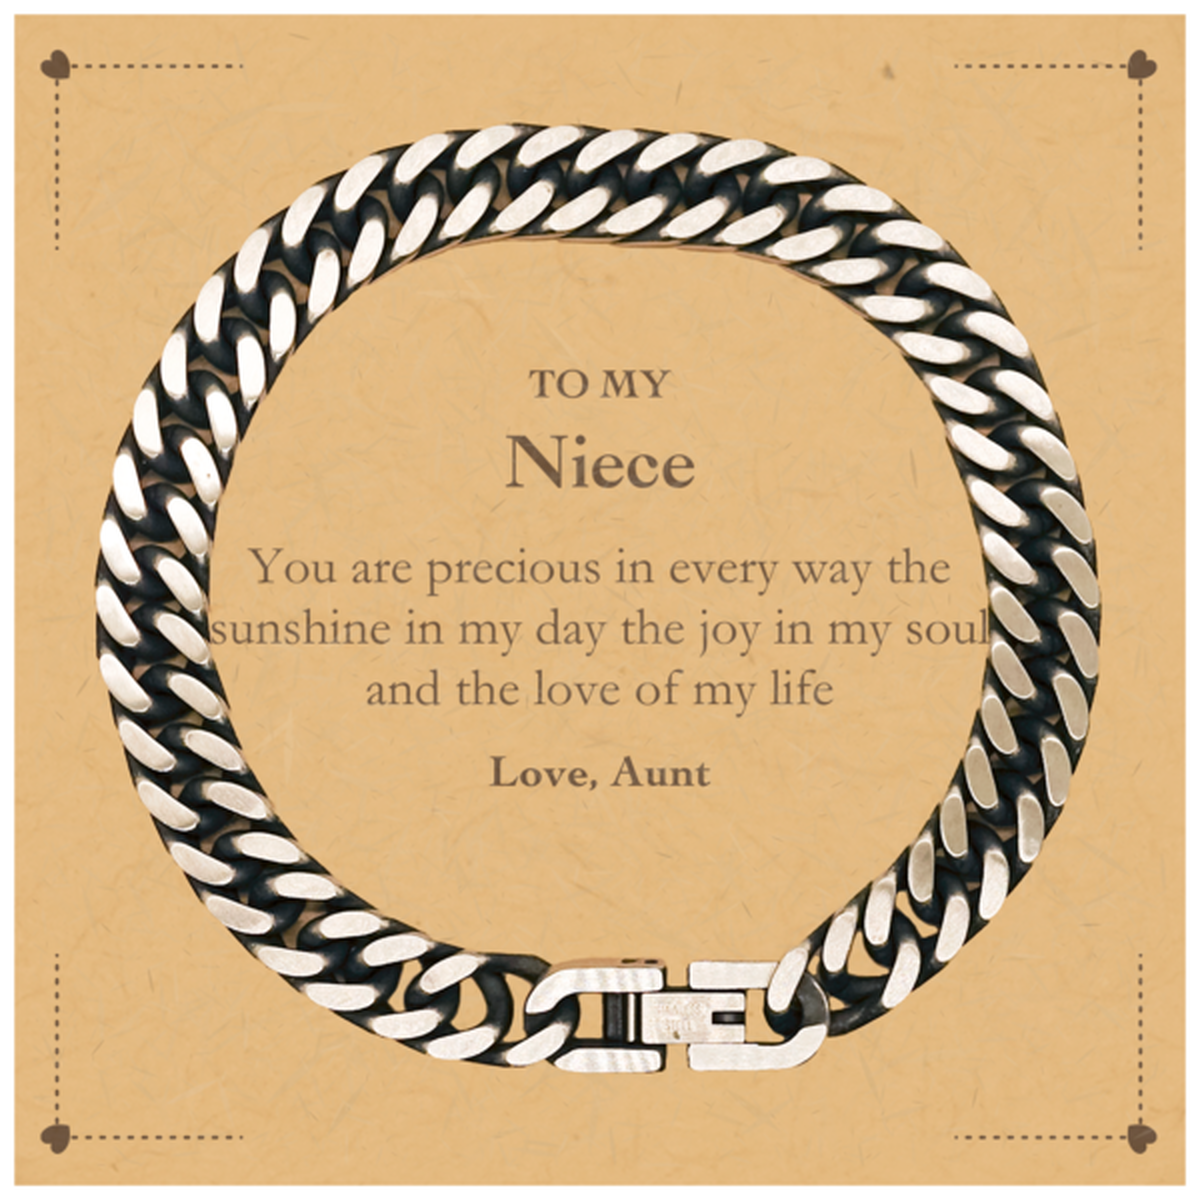 Graduation Gifts for Niece Cuban Link Chain Bracelet Present from Aunt, Christmas Niece Birthday Gifts Niece You are precious in every way the sunshine in my day. Love, Aunt